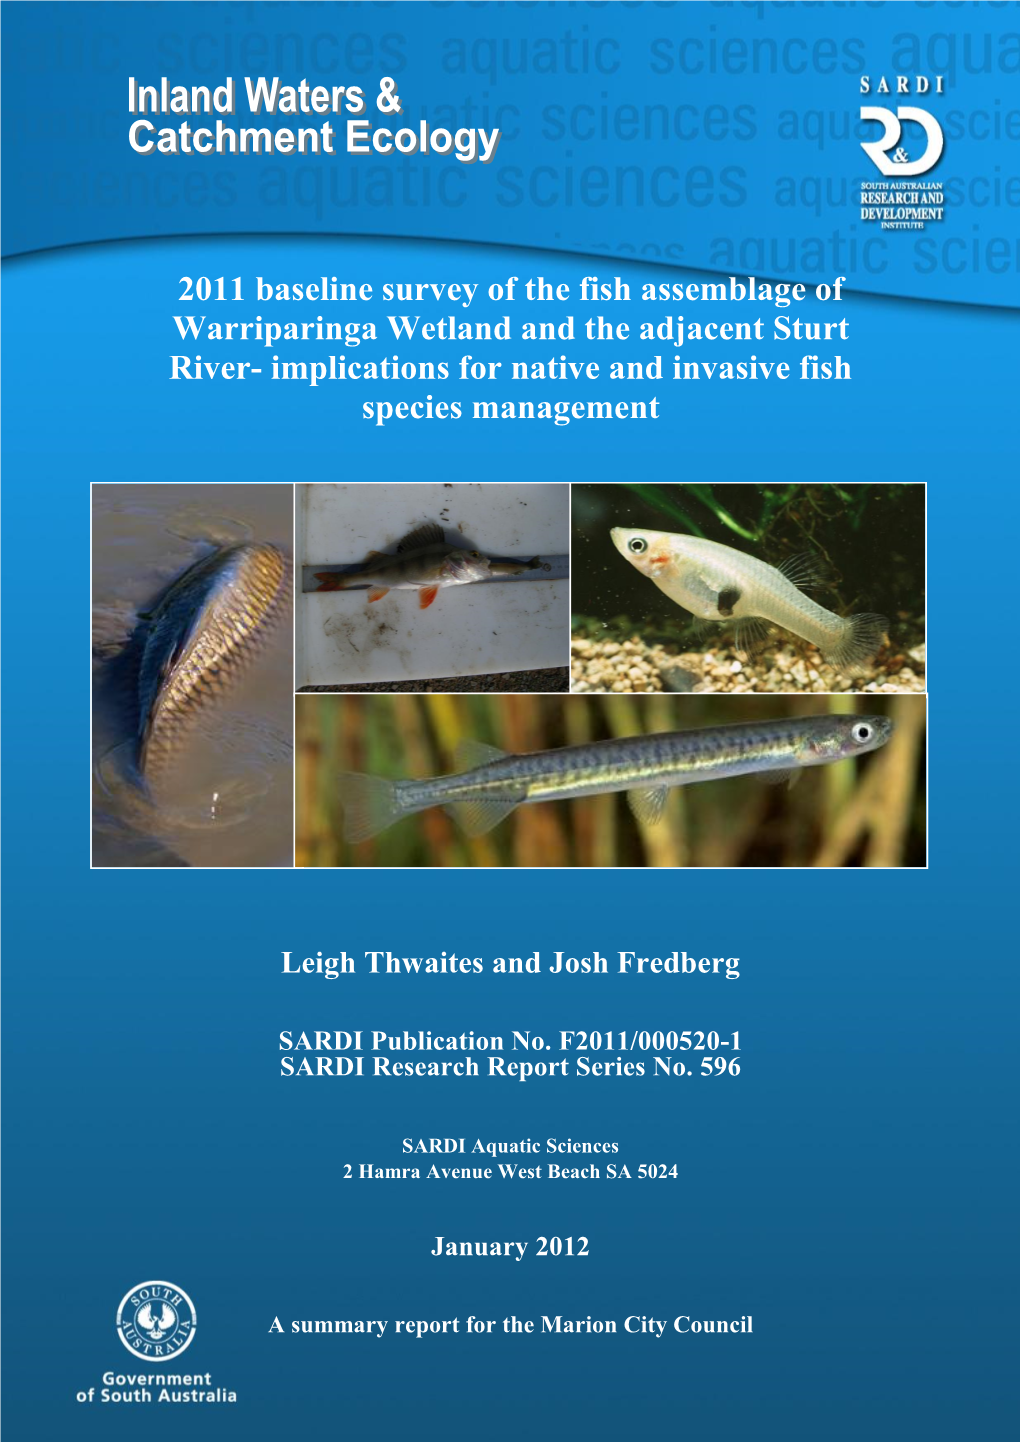 2011 Baseline Survey of the Fish Assemblage of Warriparinga Wetland and the Adjacent Sturt River- Implications for Native and Invasive Fish Species Management